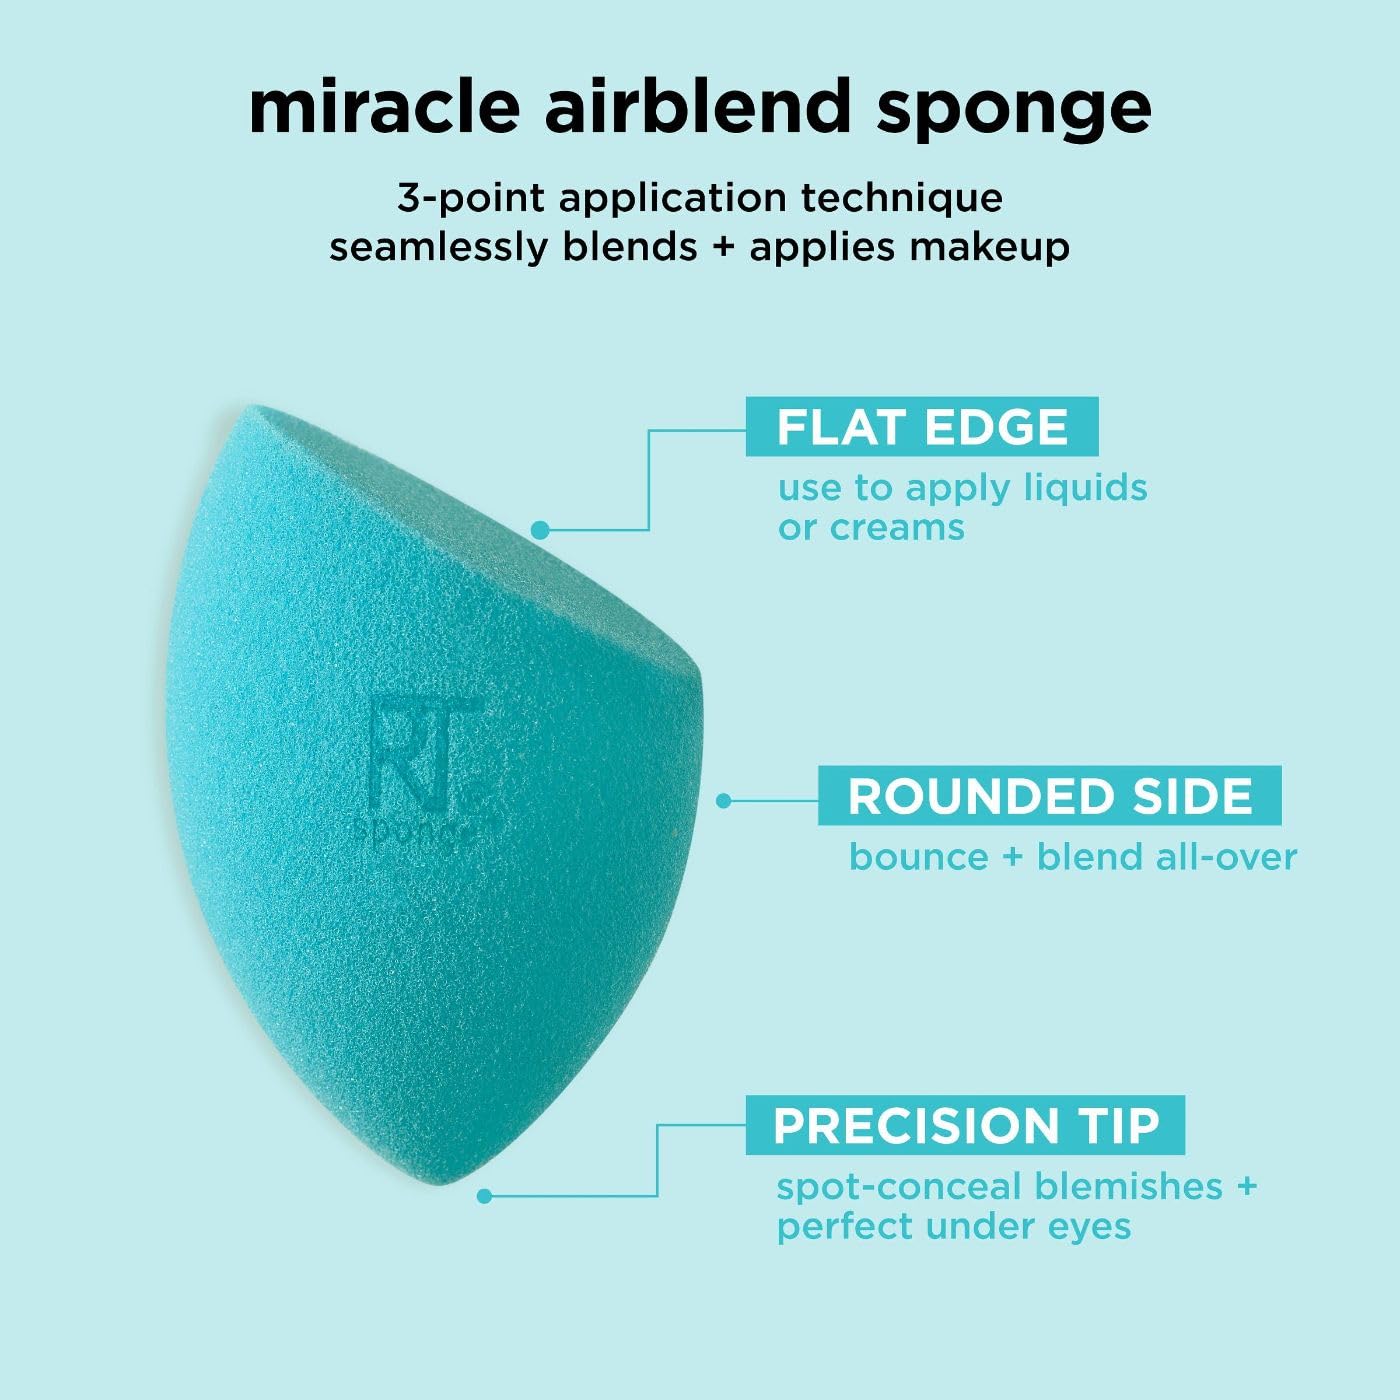 Real Techniques Assorted Makeup Blending Sponges, Miracle Complexion, Miracle Powder, & Miracle Airblend Sponges, For Blending & Baking, Use With Foundation & Powder, Dewy or Matte Finish, 6 Pack